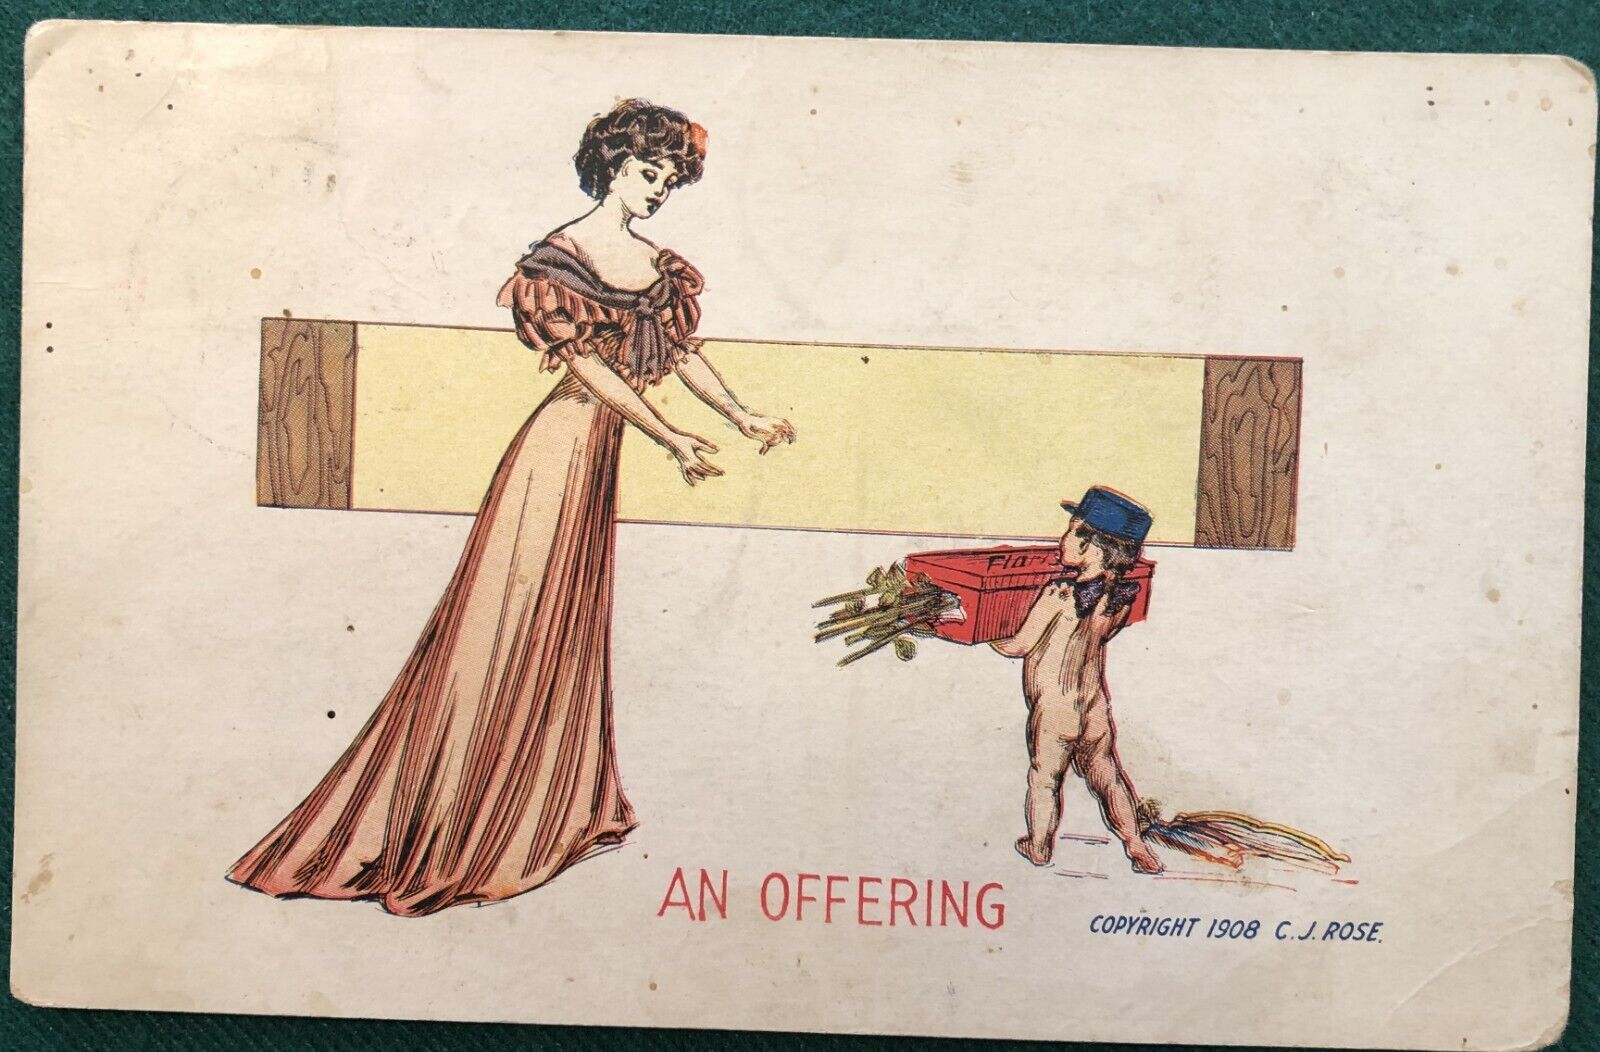 Antique “An Offering” Post Card (Art By C.J. Rose, 1908) Posted 1908